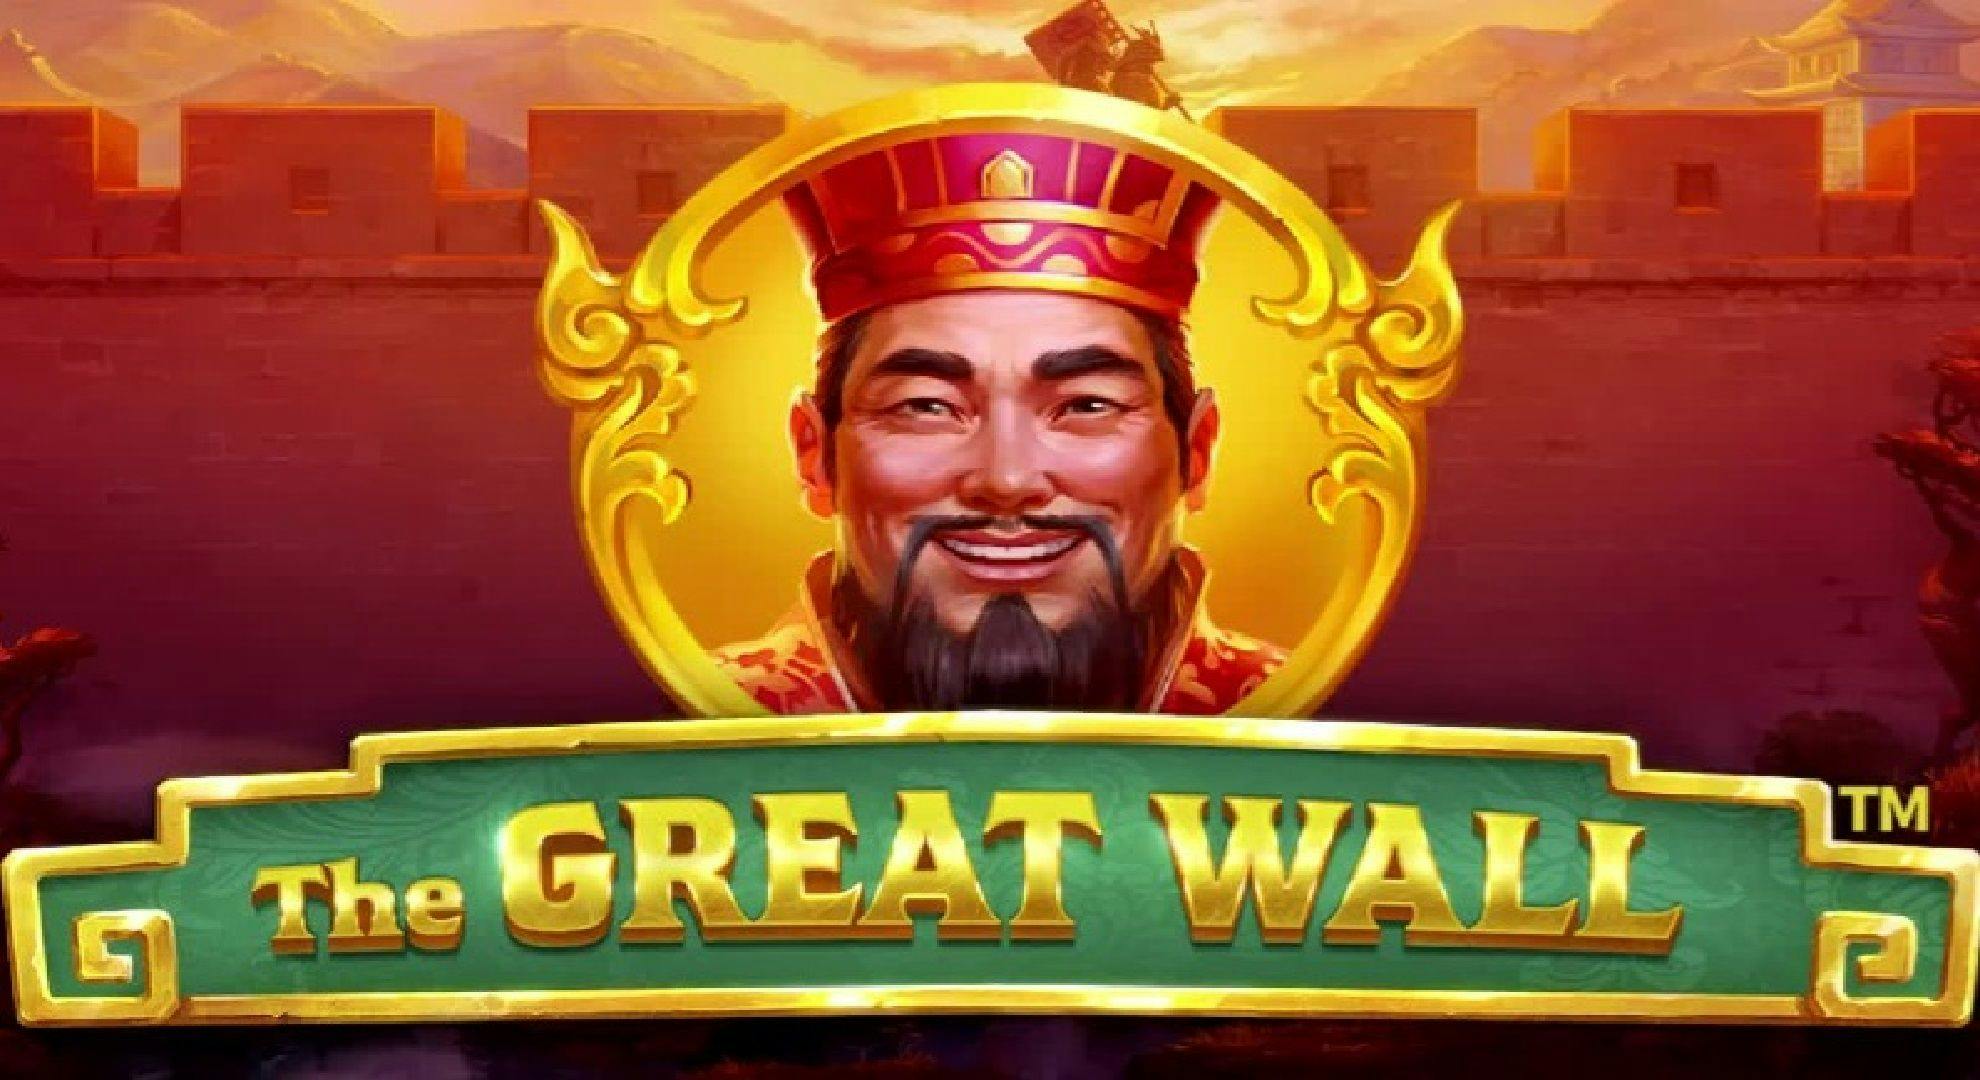 The Great Wall Slot Online Free Play